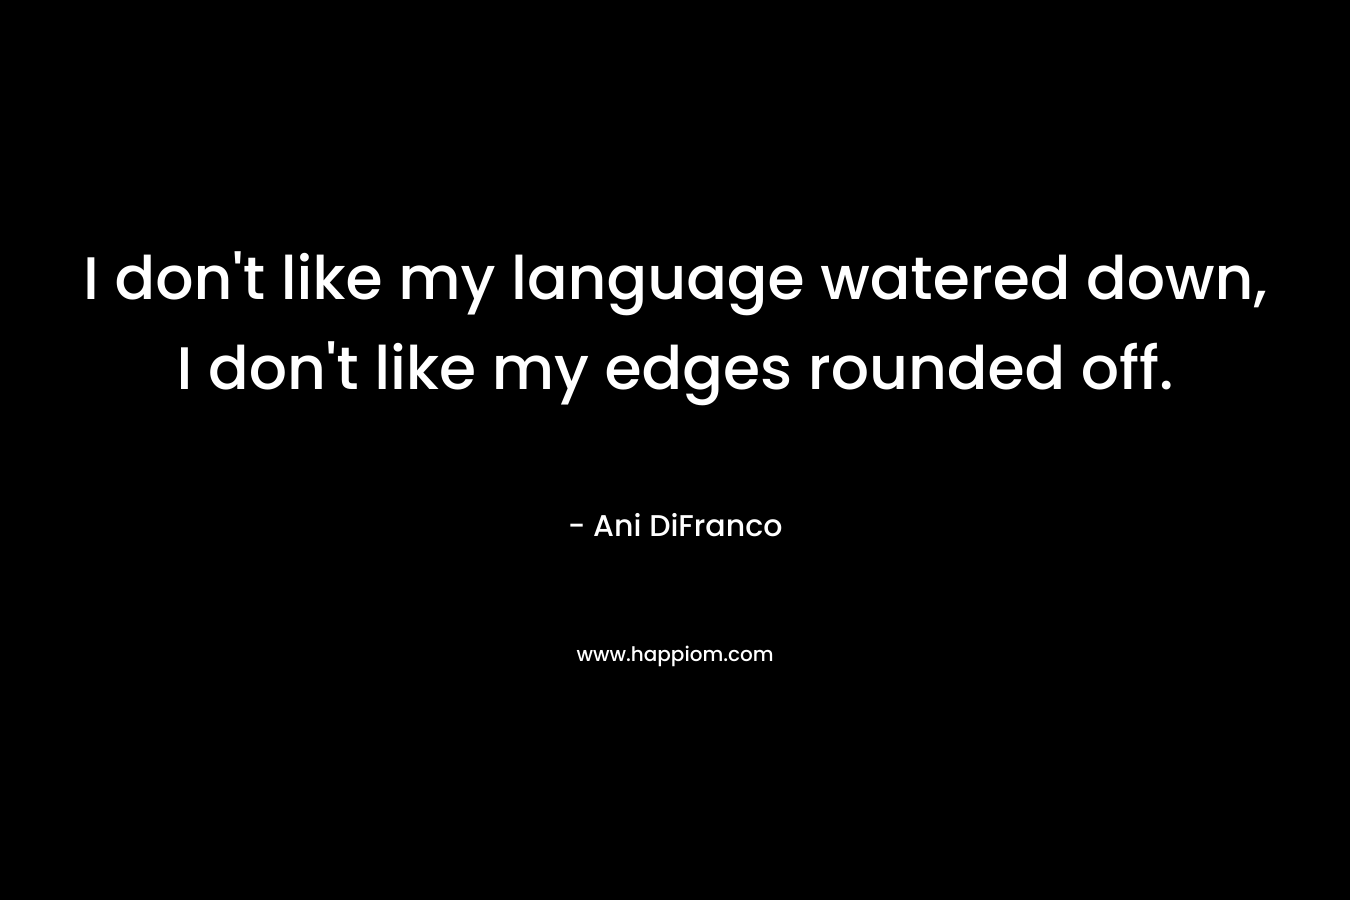 I don't like my language watered down, I don't like my edges rounded off.